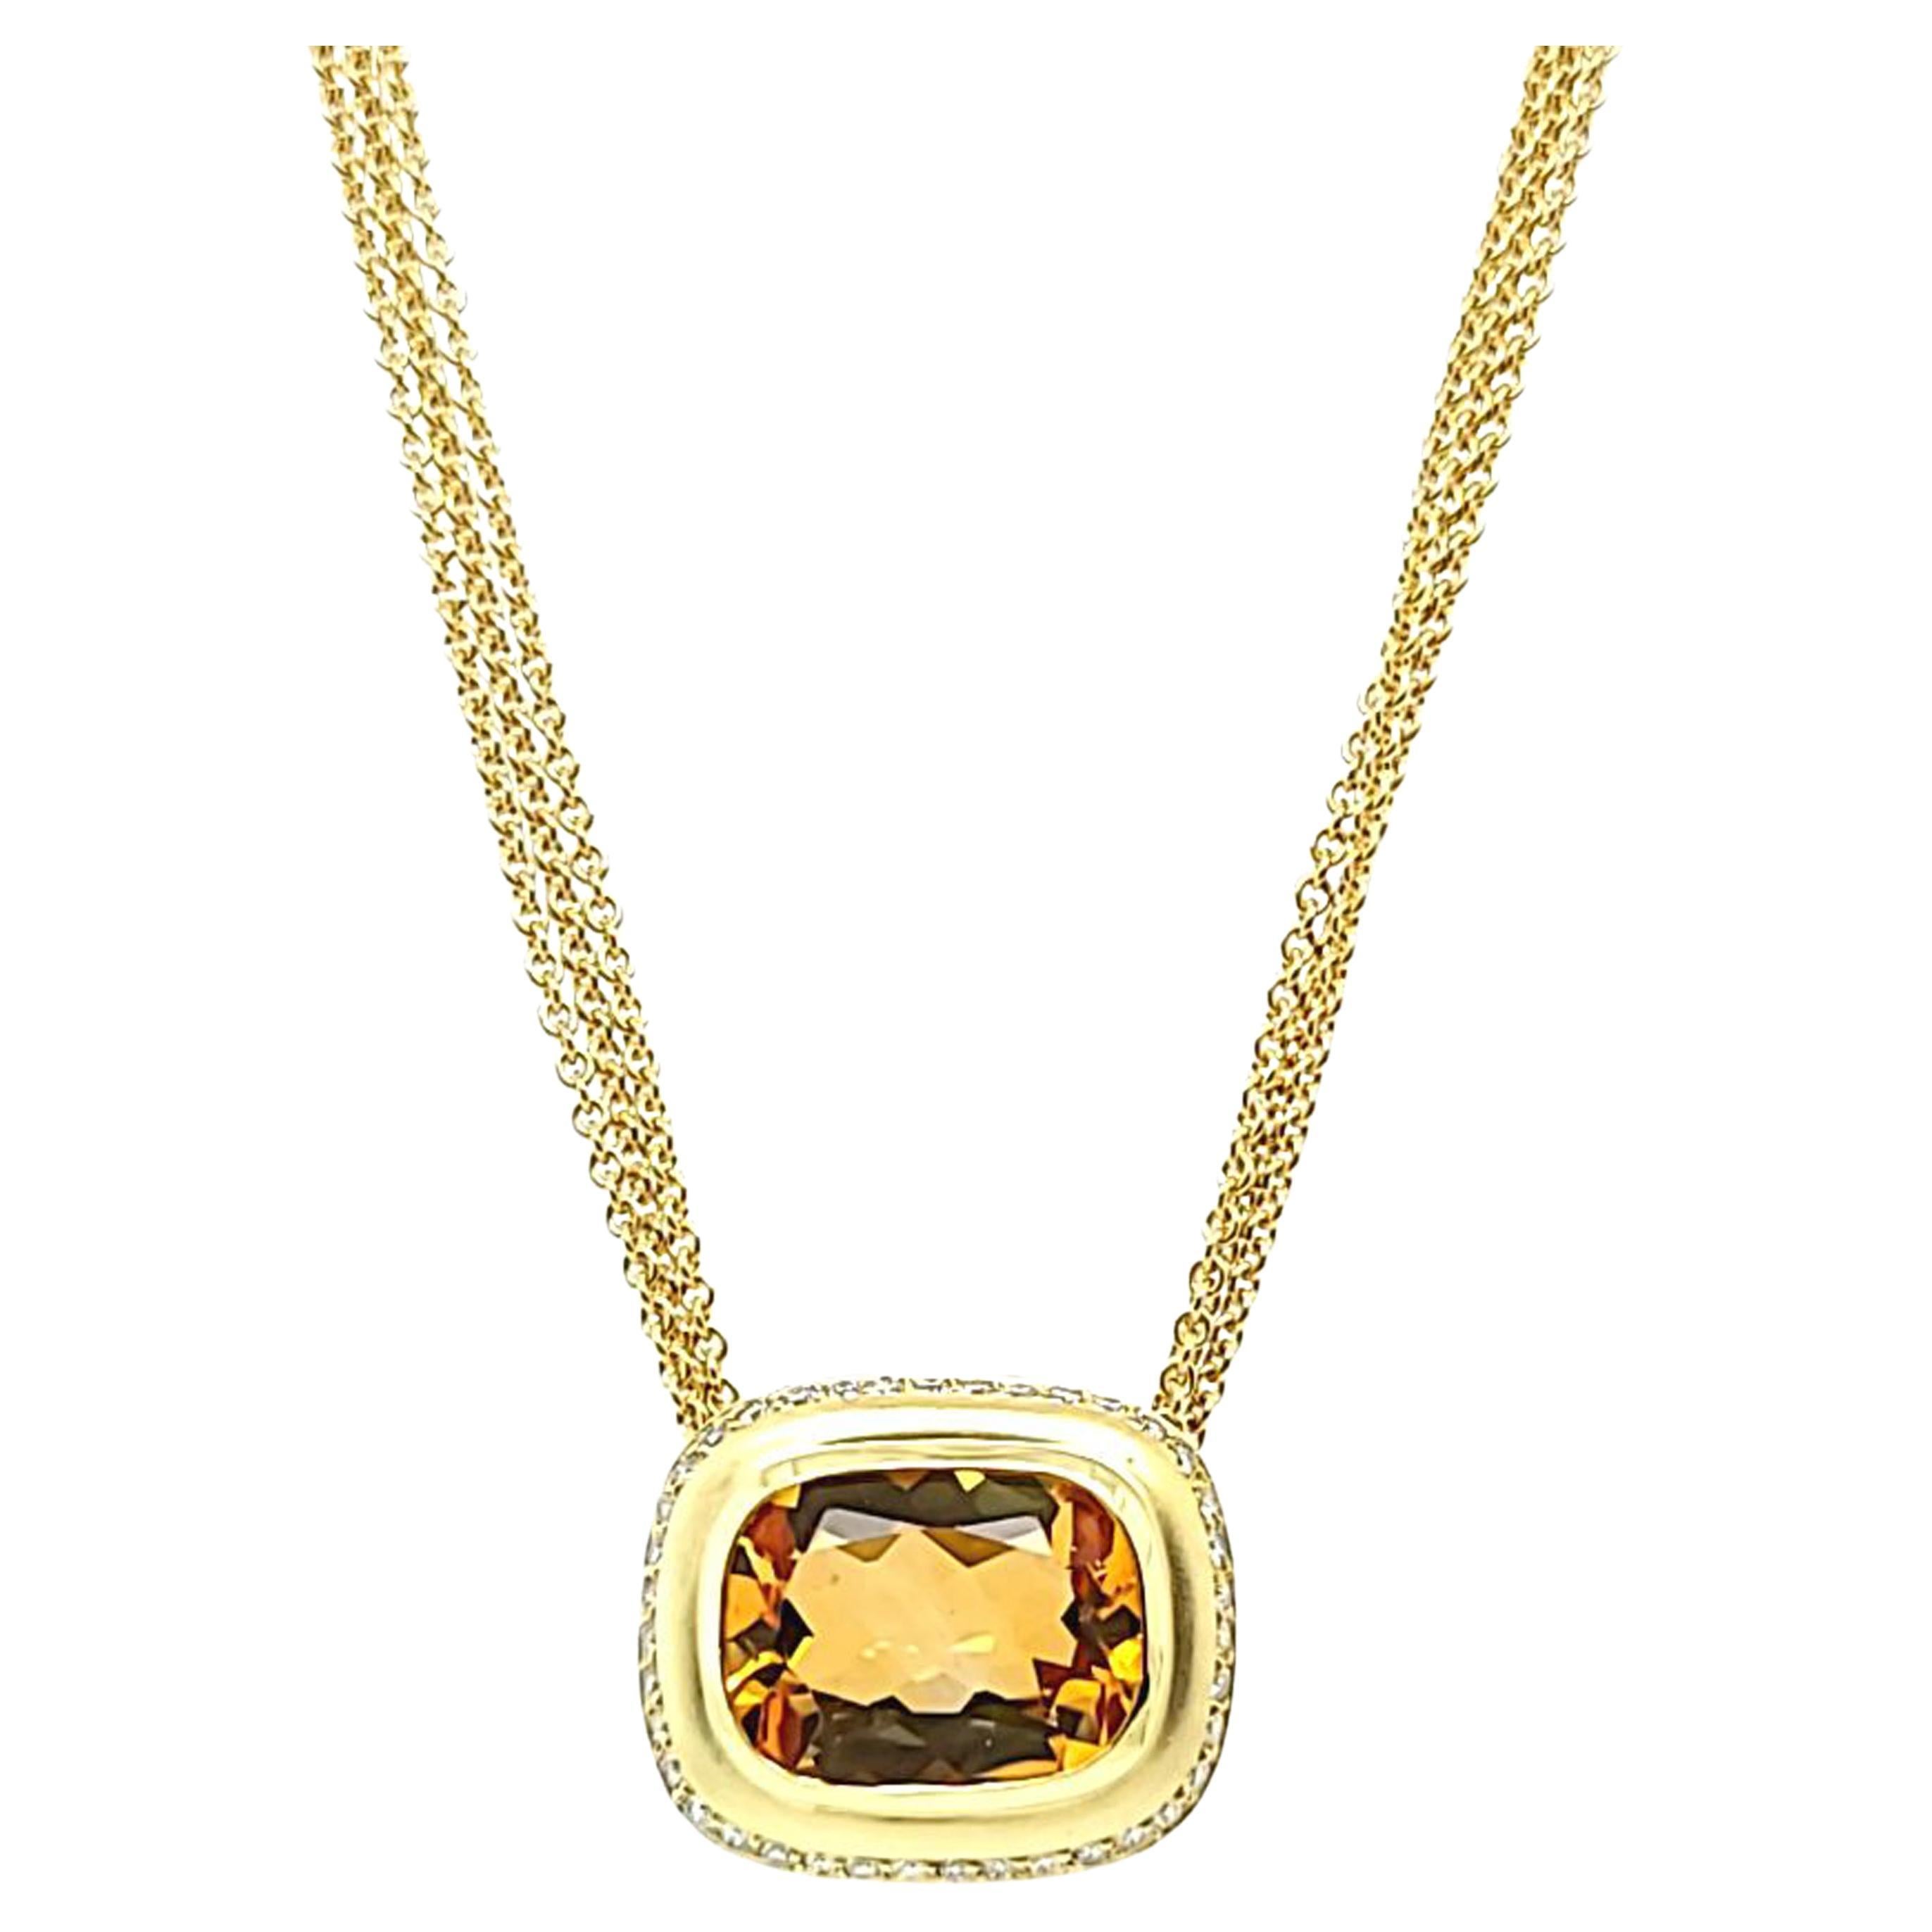 18 Karat Brushed Yellow Gold Slide Pendant Necklace Featuring A Bezel-set Cushion Cut Citrine Weighing Approximately 10 Carats Surrounded by 39 Round Brilliant Cut Diamonds of SI Clarity and H Color Totaling 0.39 Carats. 16 Inch Triple Chain with